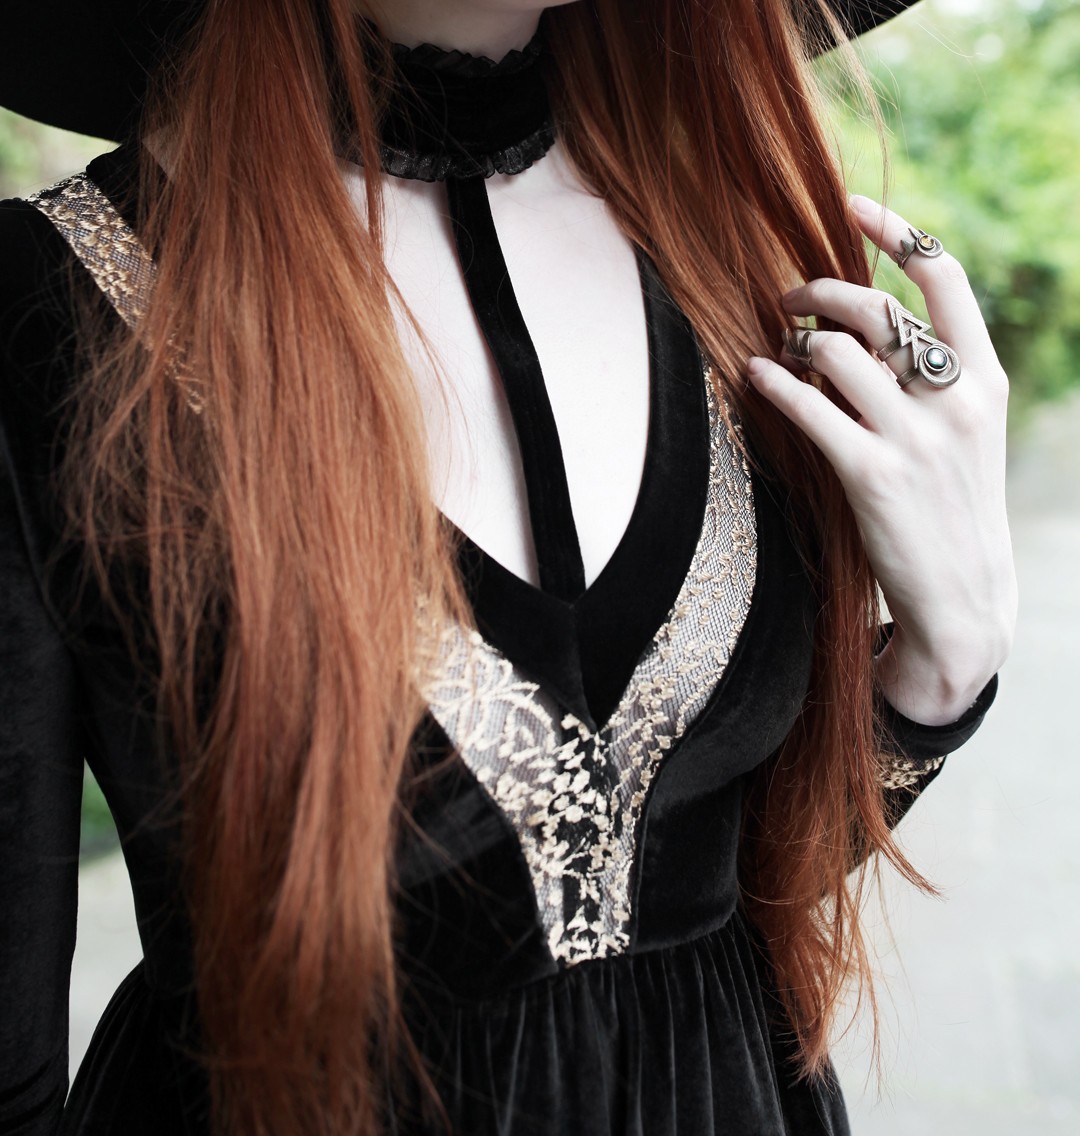 Olivia Emily wears Dark Thorn Clothing Victoria Dress, Asos Floppy Wide Brim Hat and Rogue and Wolf Jewellery